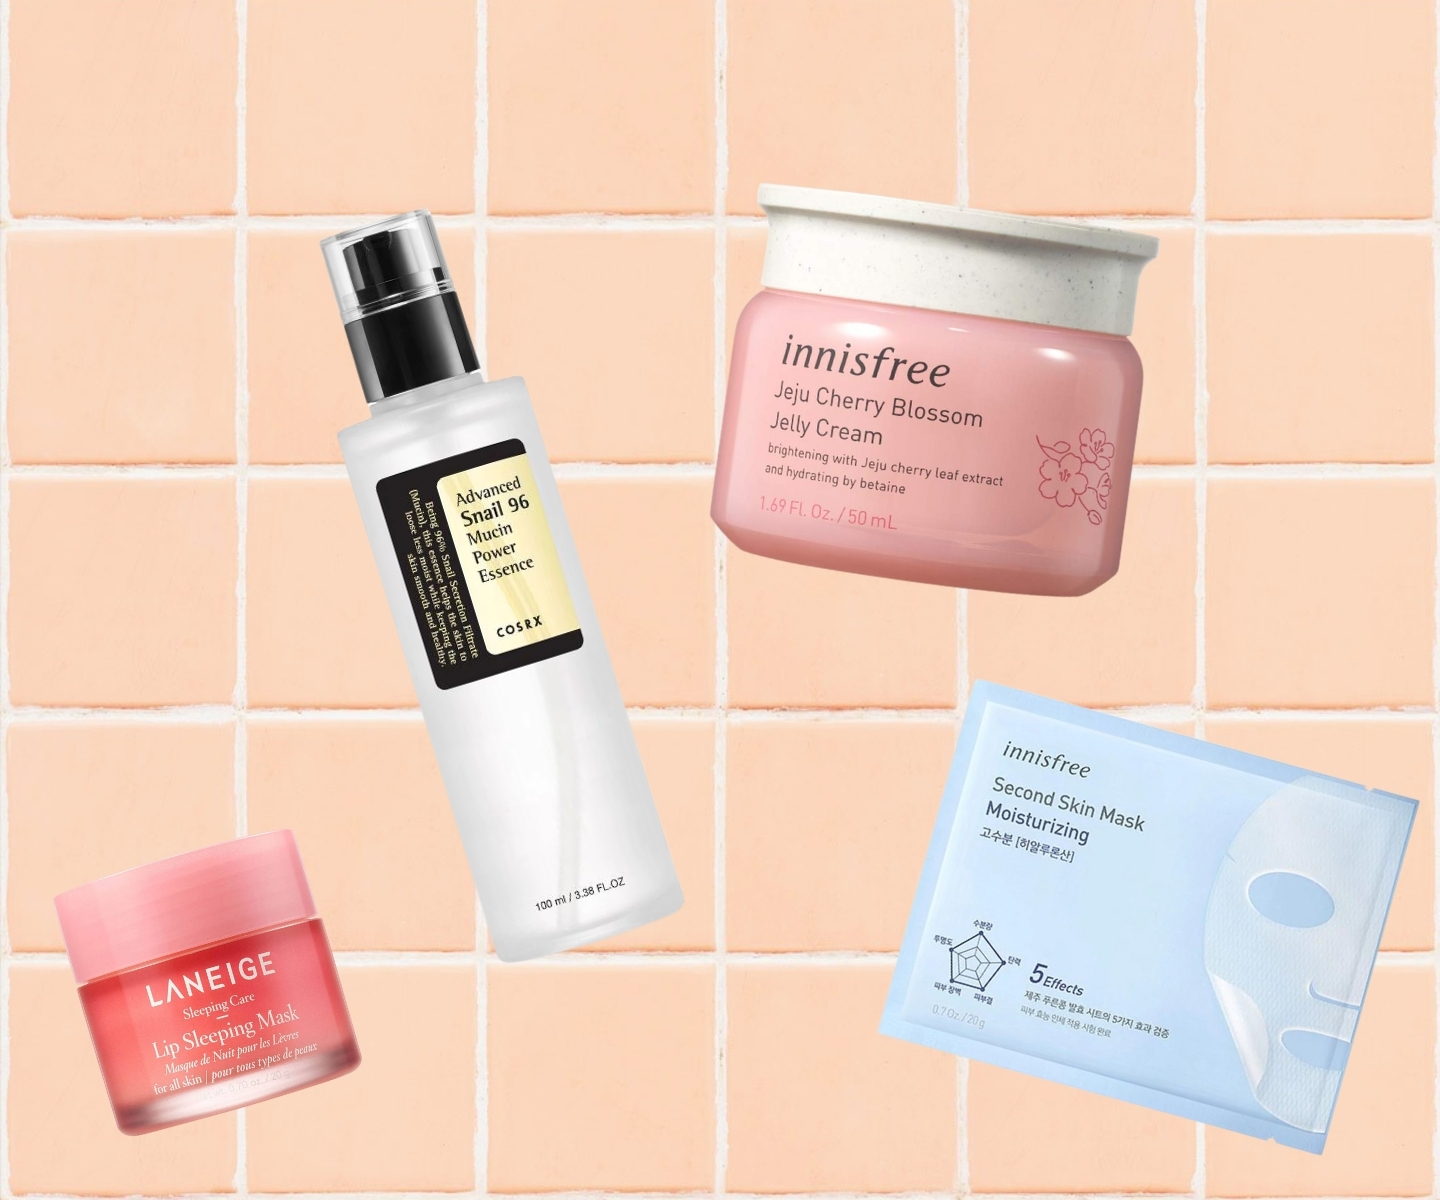 The Top 10 Korean & Japanese Skincare Products on Adore Beauty Right Now...